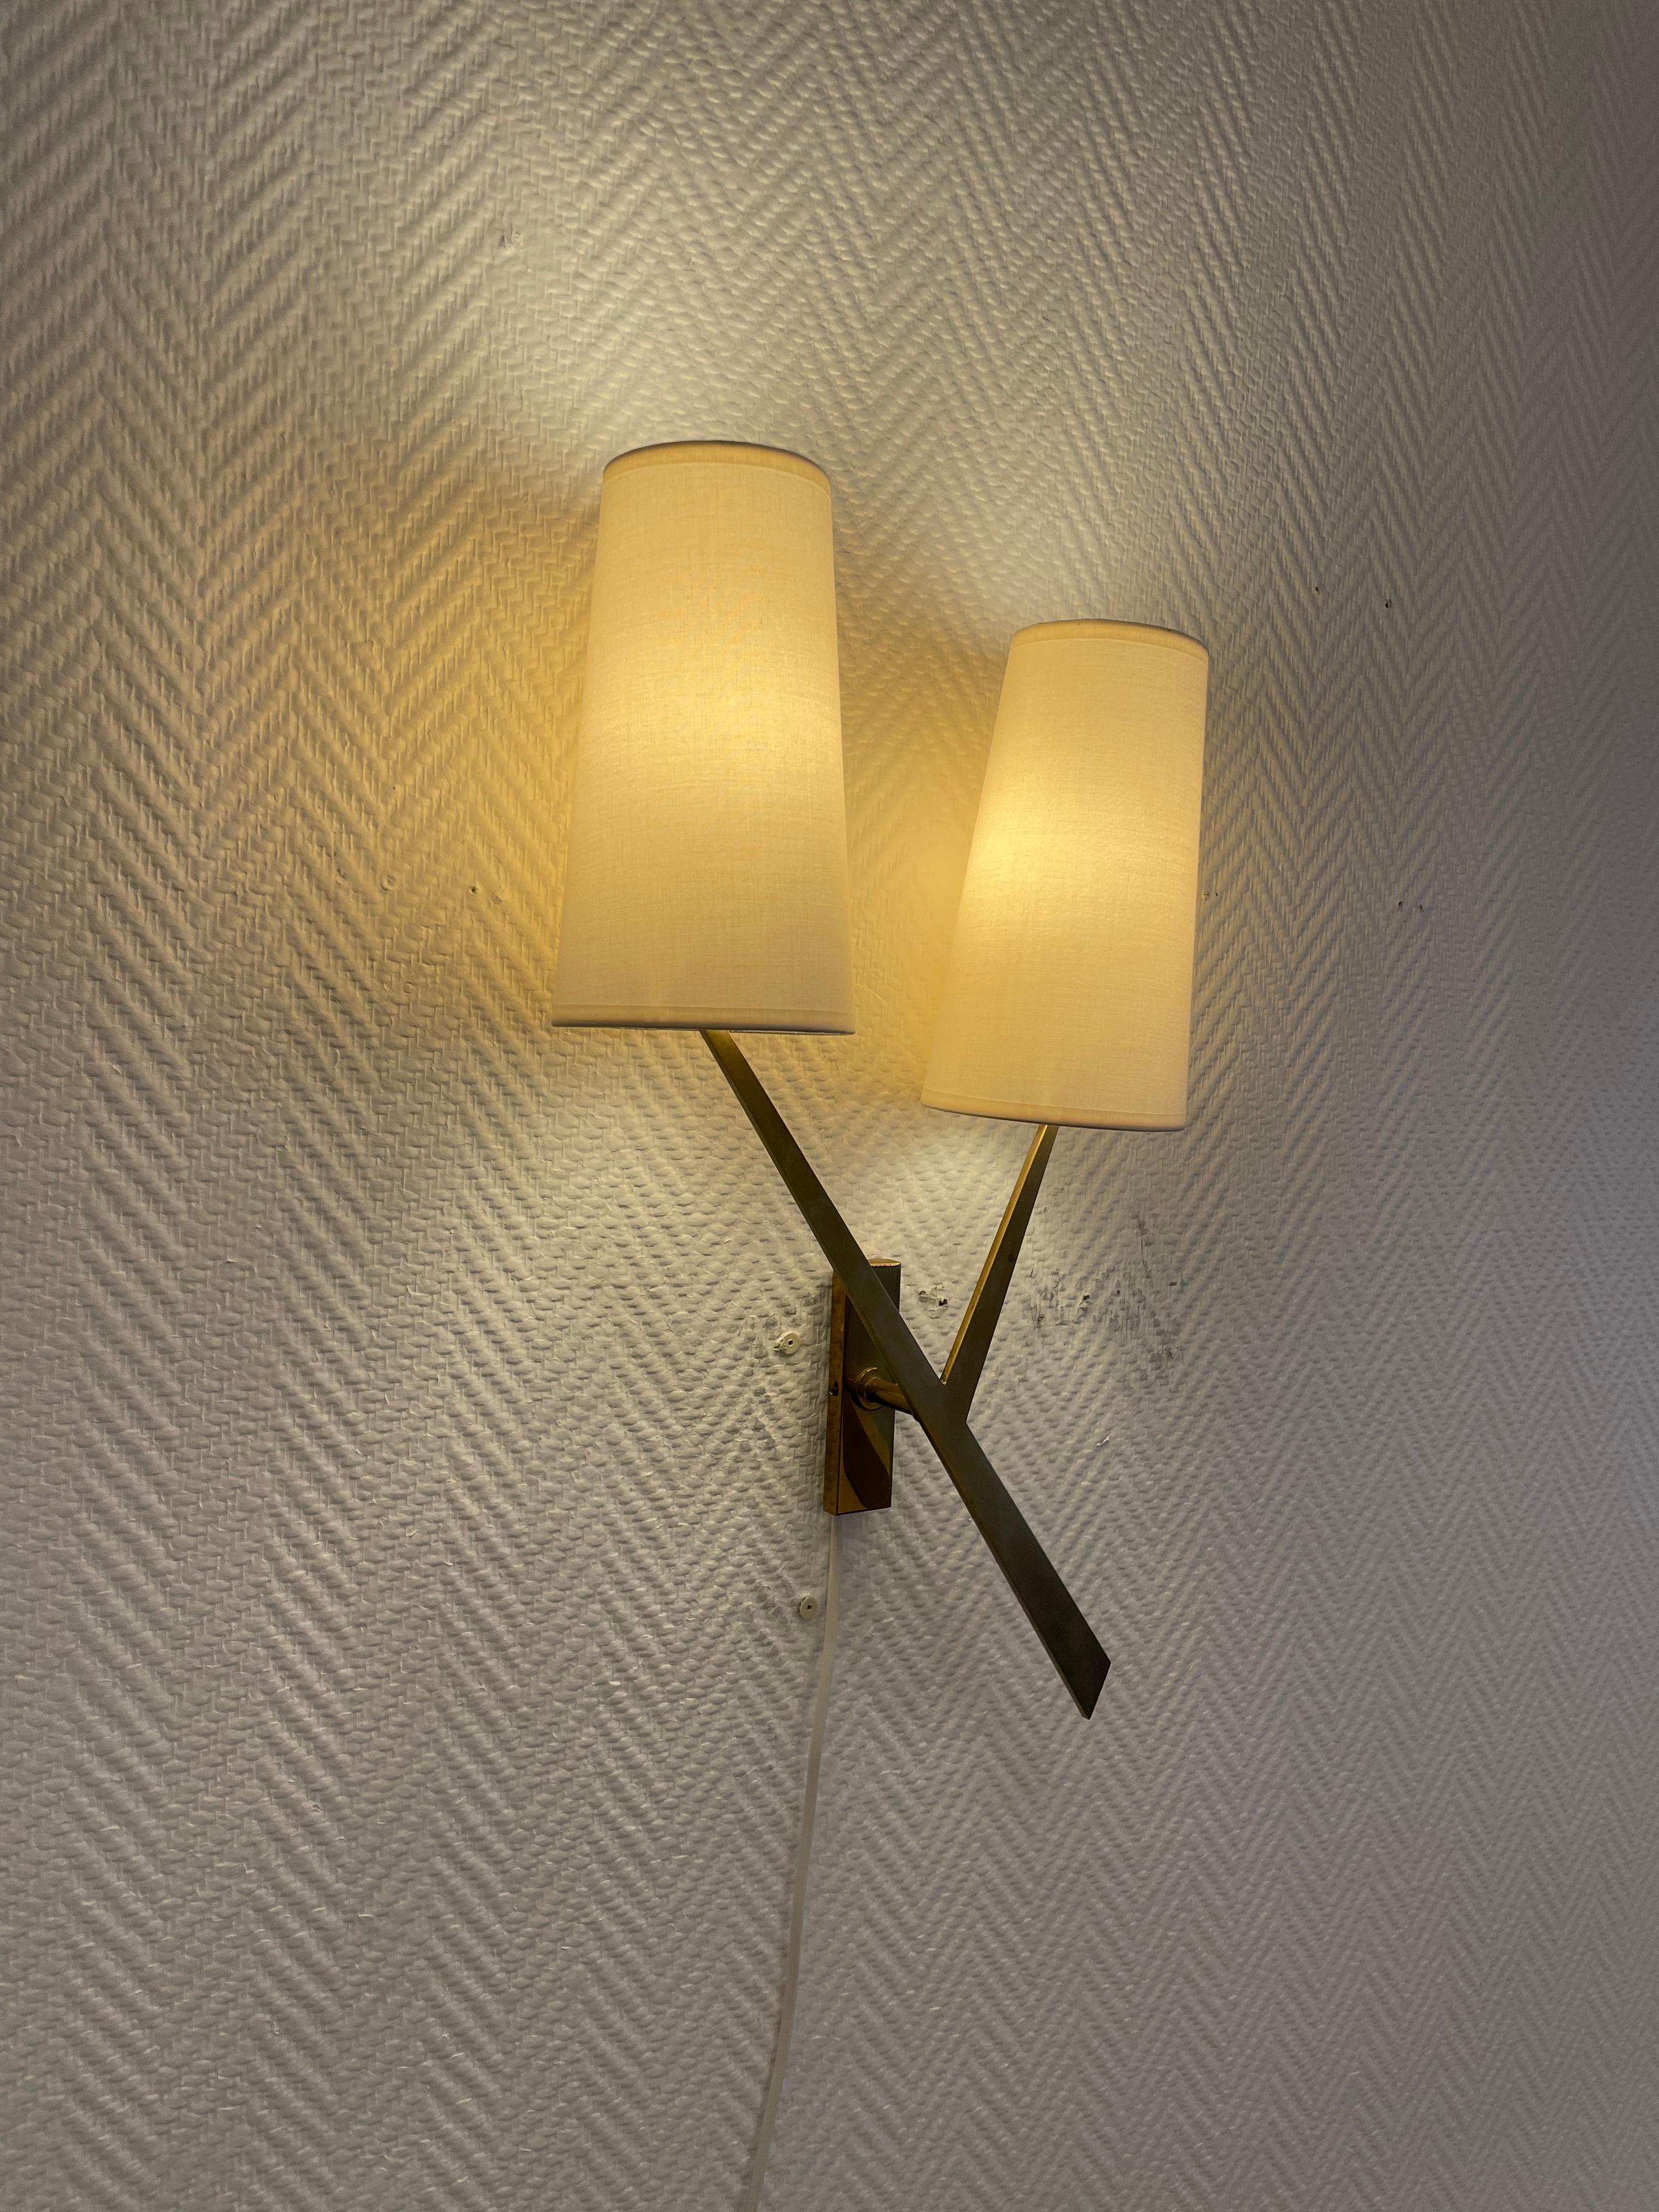 Pair of Sconces by Lunel 1